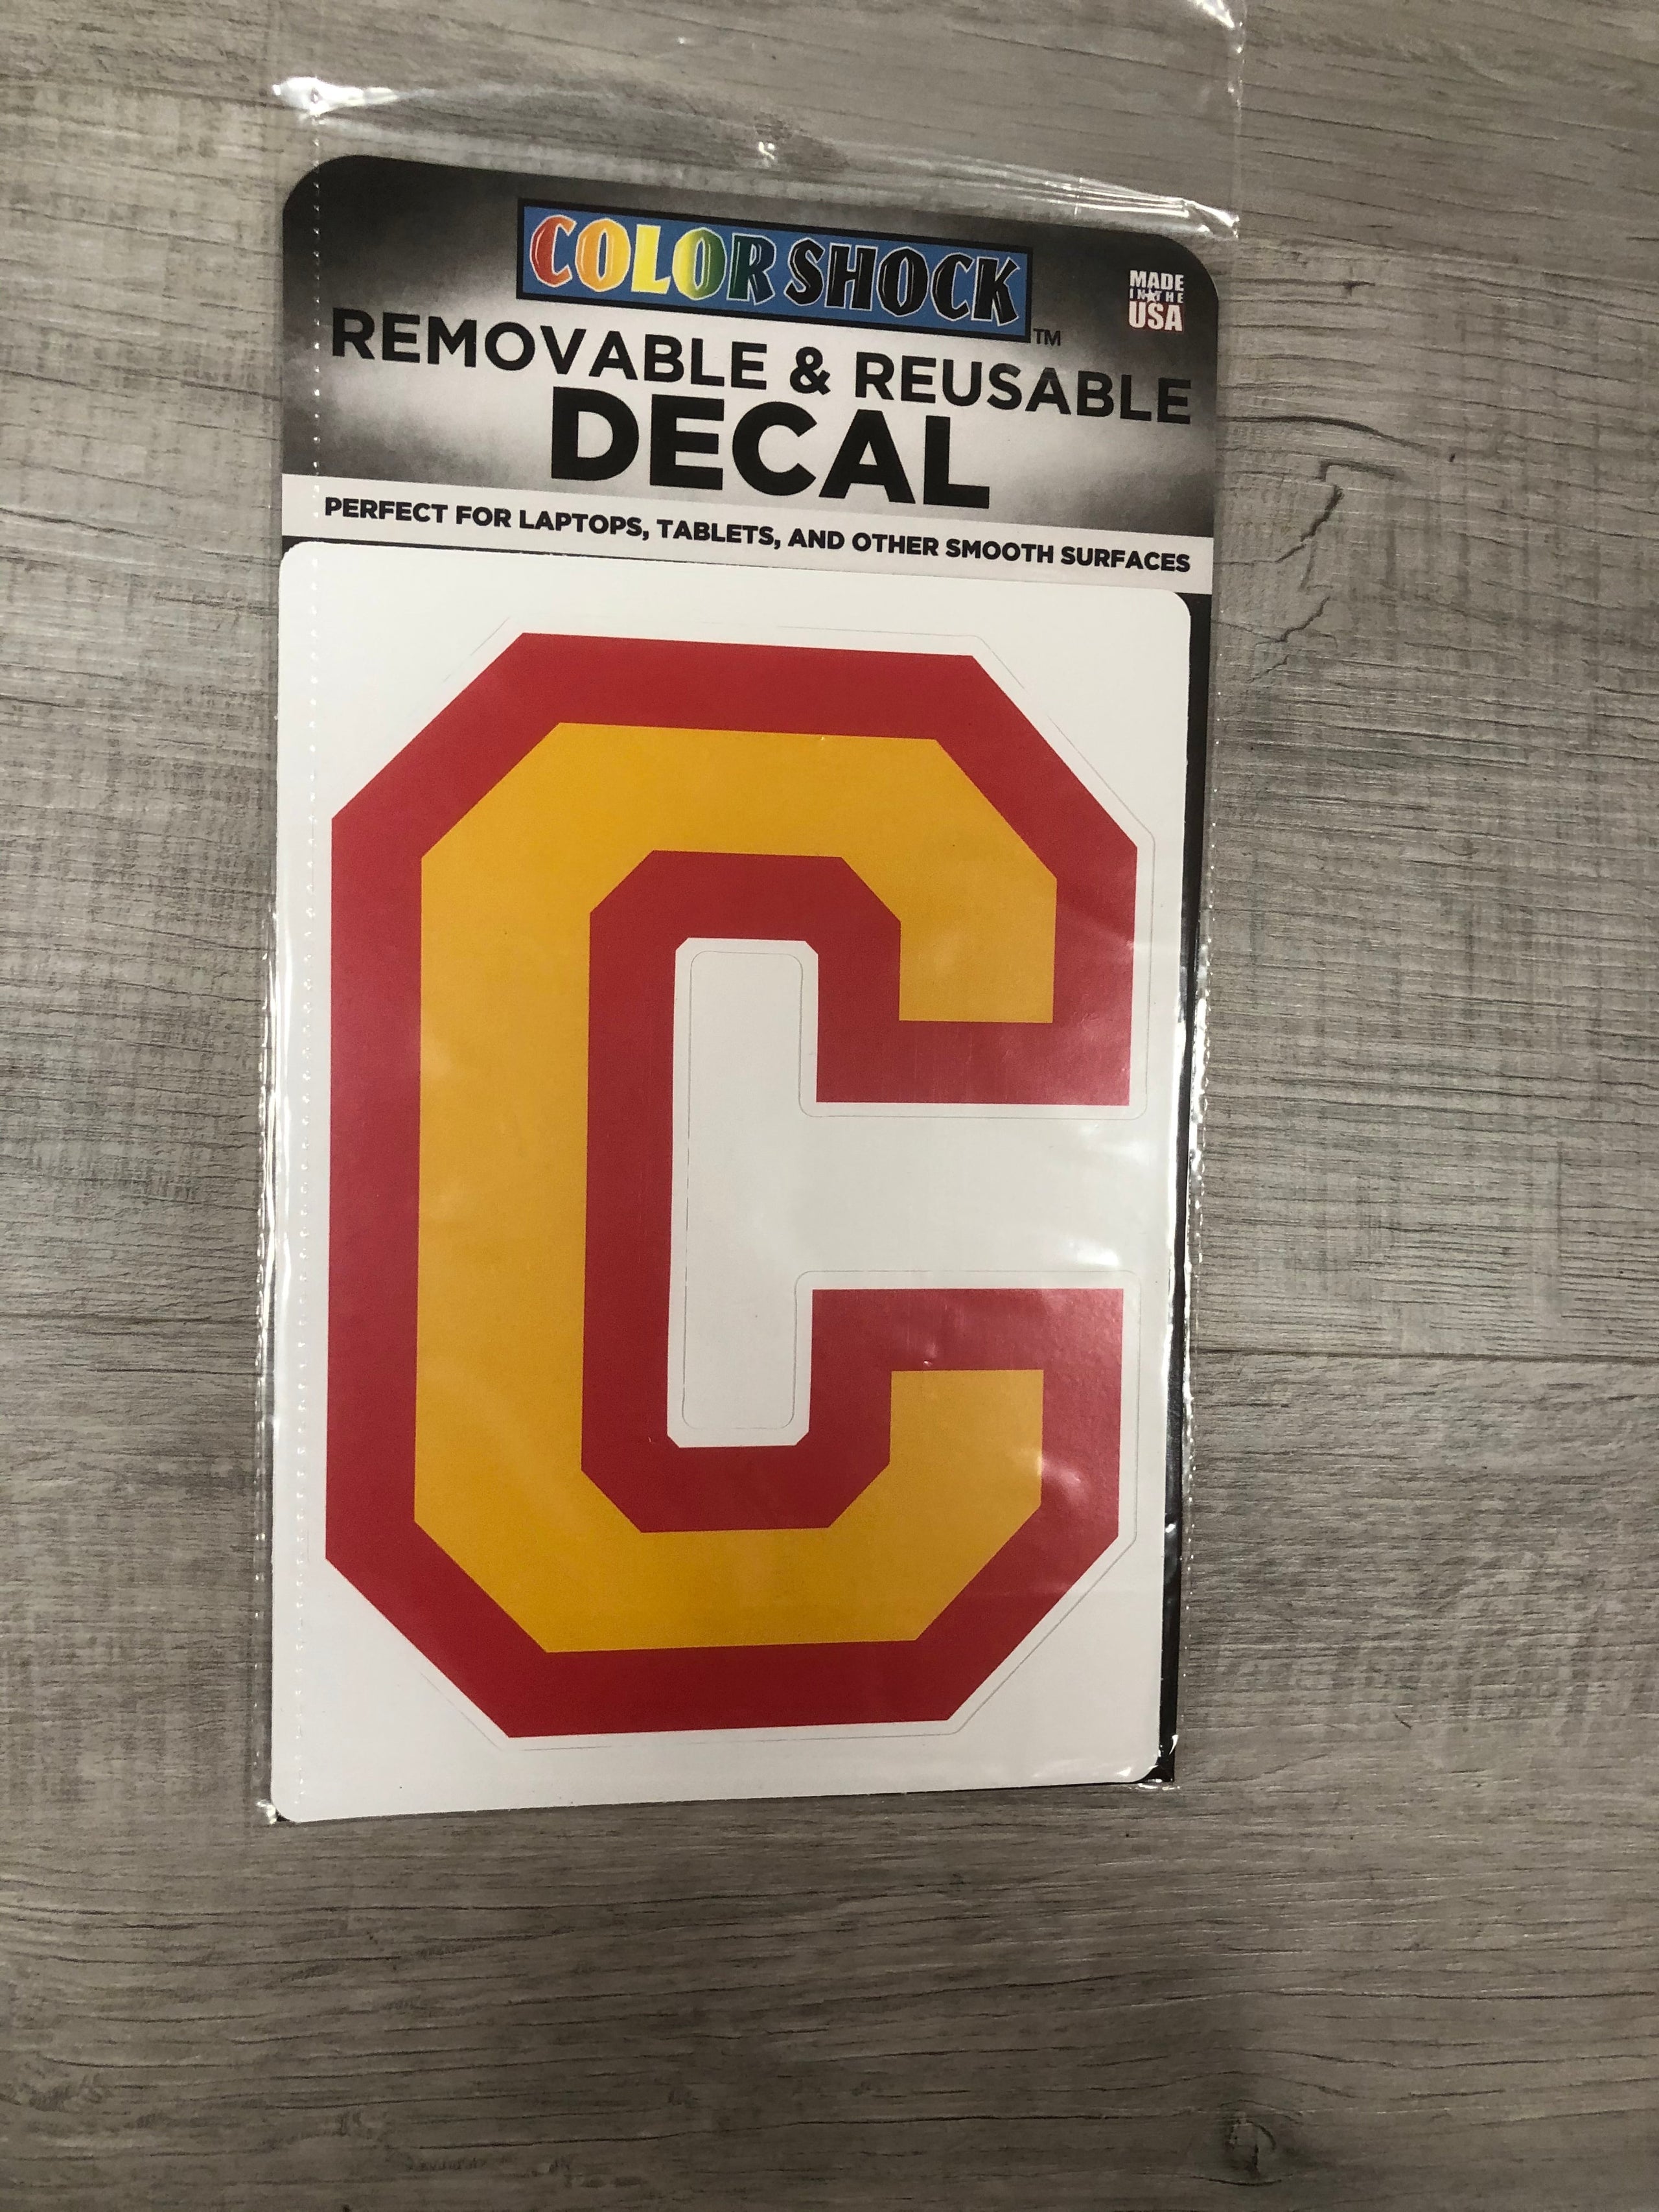 "C" Removable & Reusable Decal